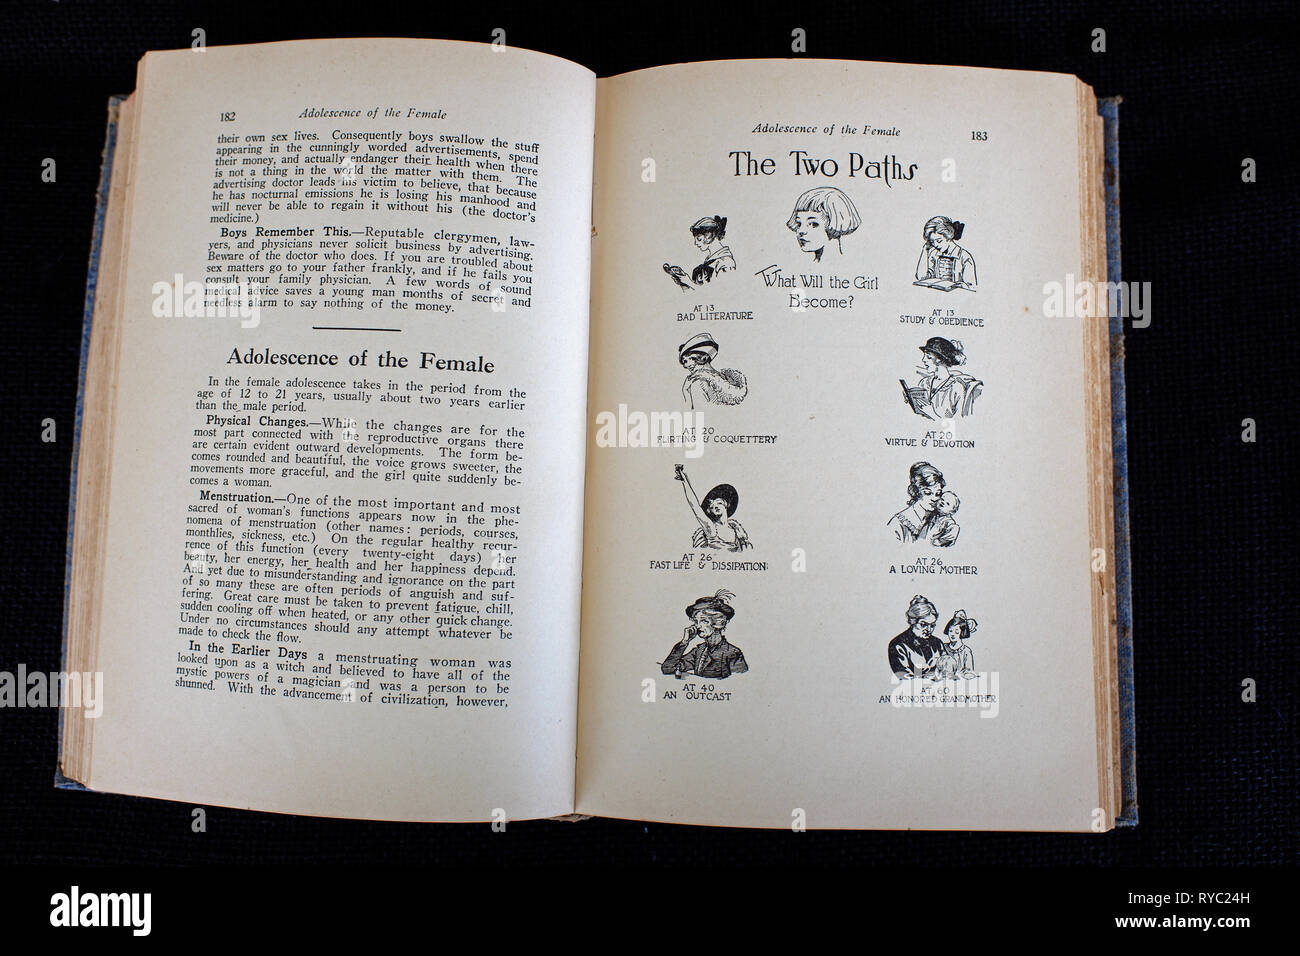 PAGES FROM ANTIQUE BOOK ON FEMALE ADOLESCENCE Stock Photo